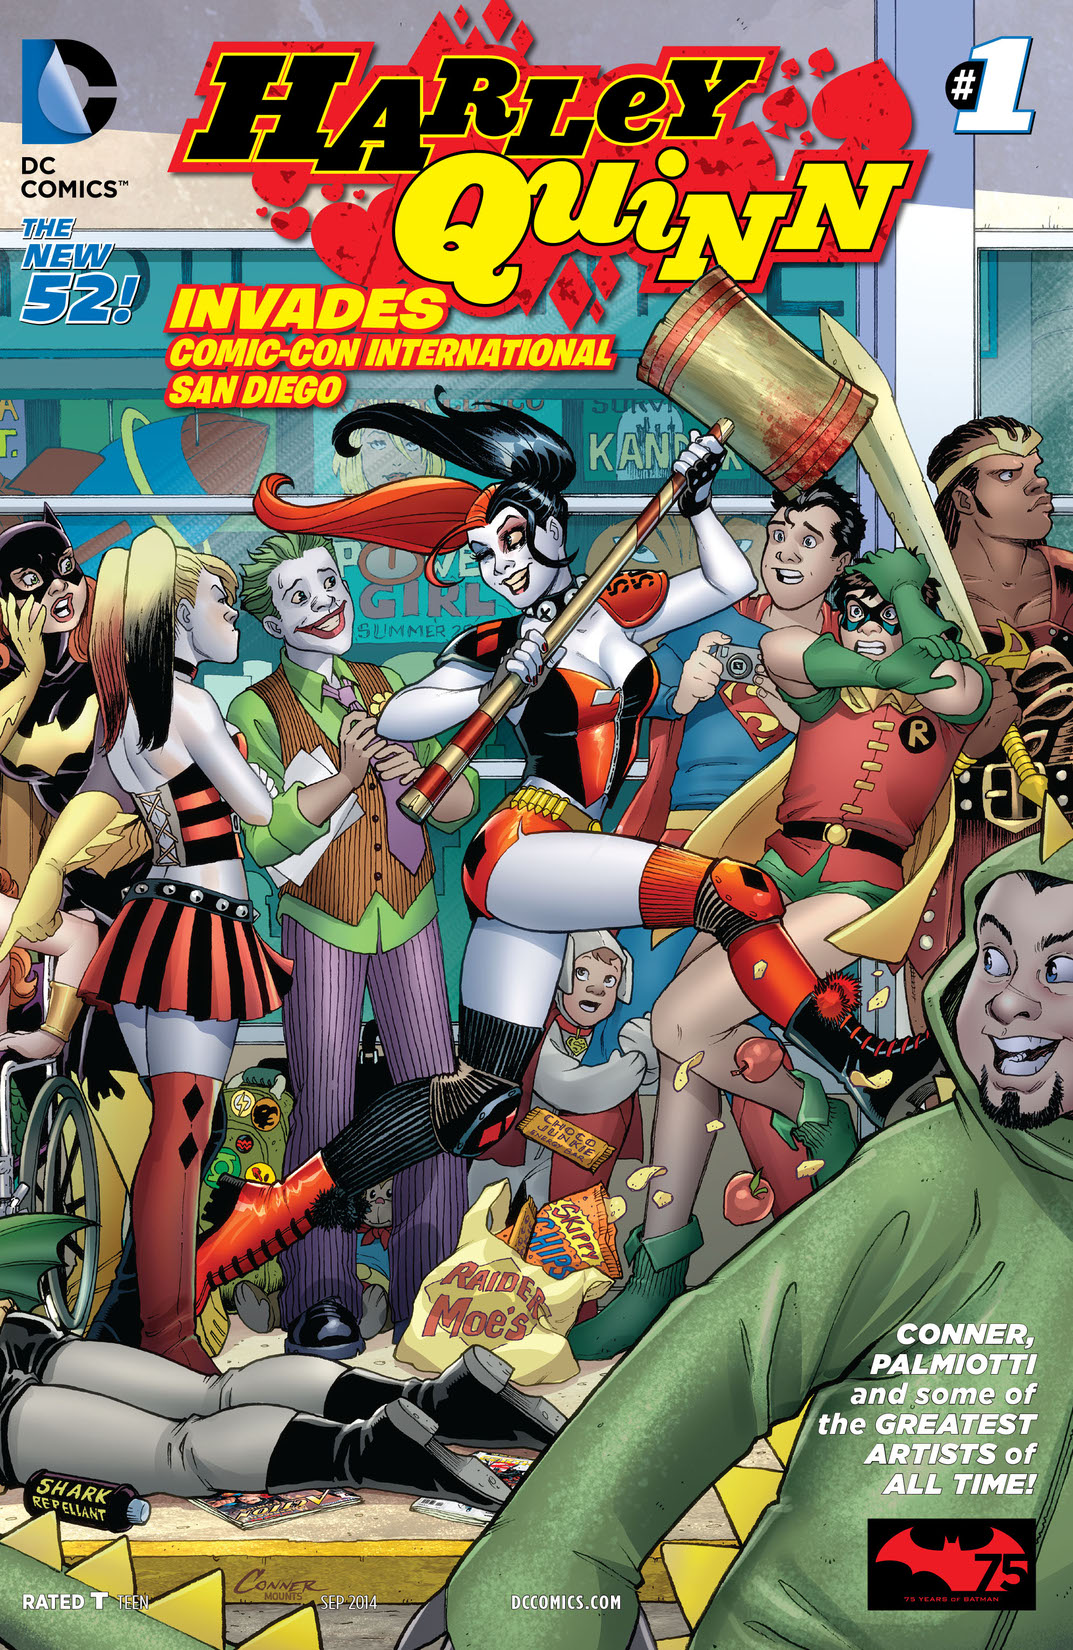 Harley Quinn Invades Comic-Con International: San Diego (2014-) #1 preview images